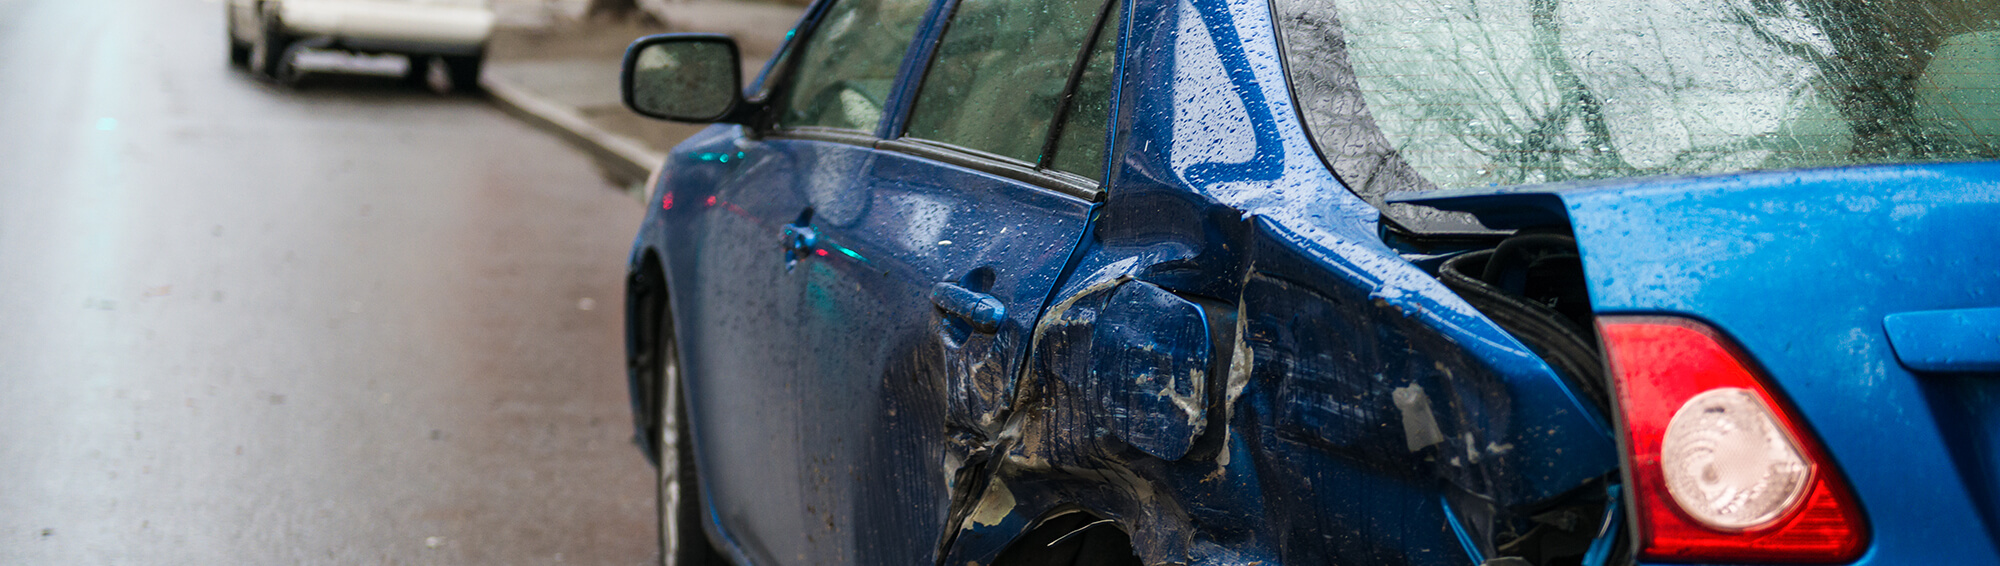 3 Common Auto Accident Injuries That Aren’t Always Obvious